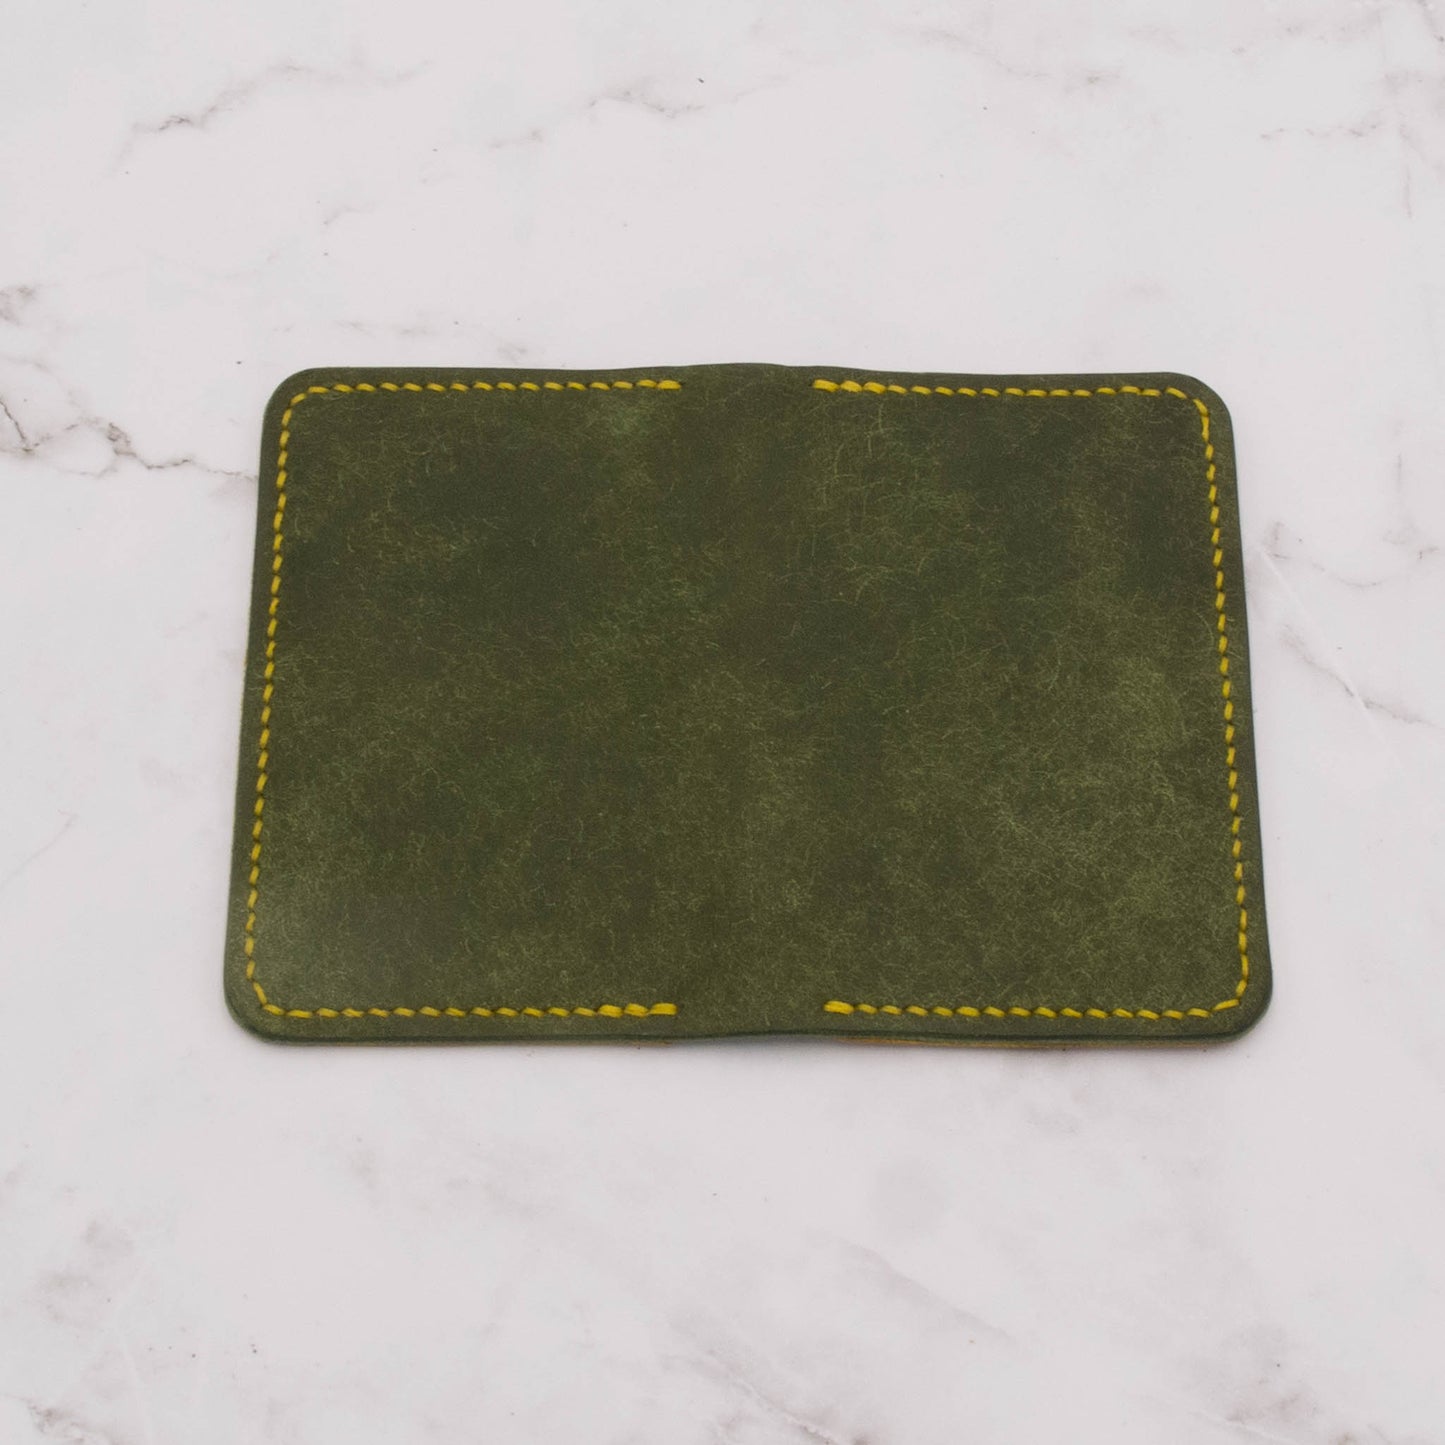 Handcrafted Leather Ultra Slim Bifold Wallet - Olive Green and Sunflower Yellow